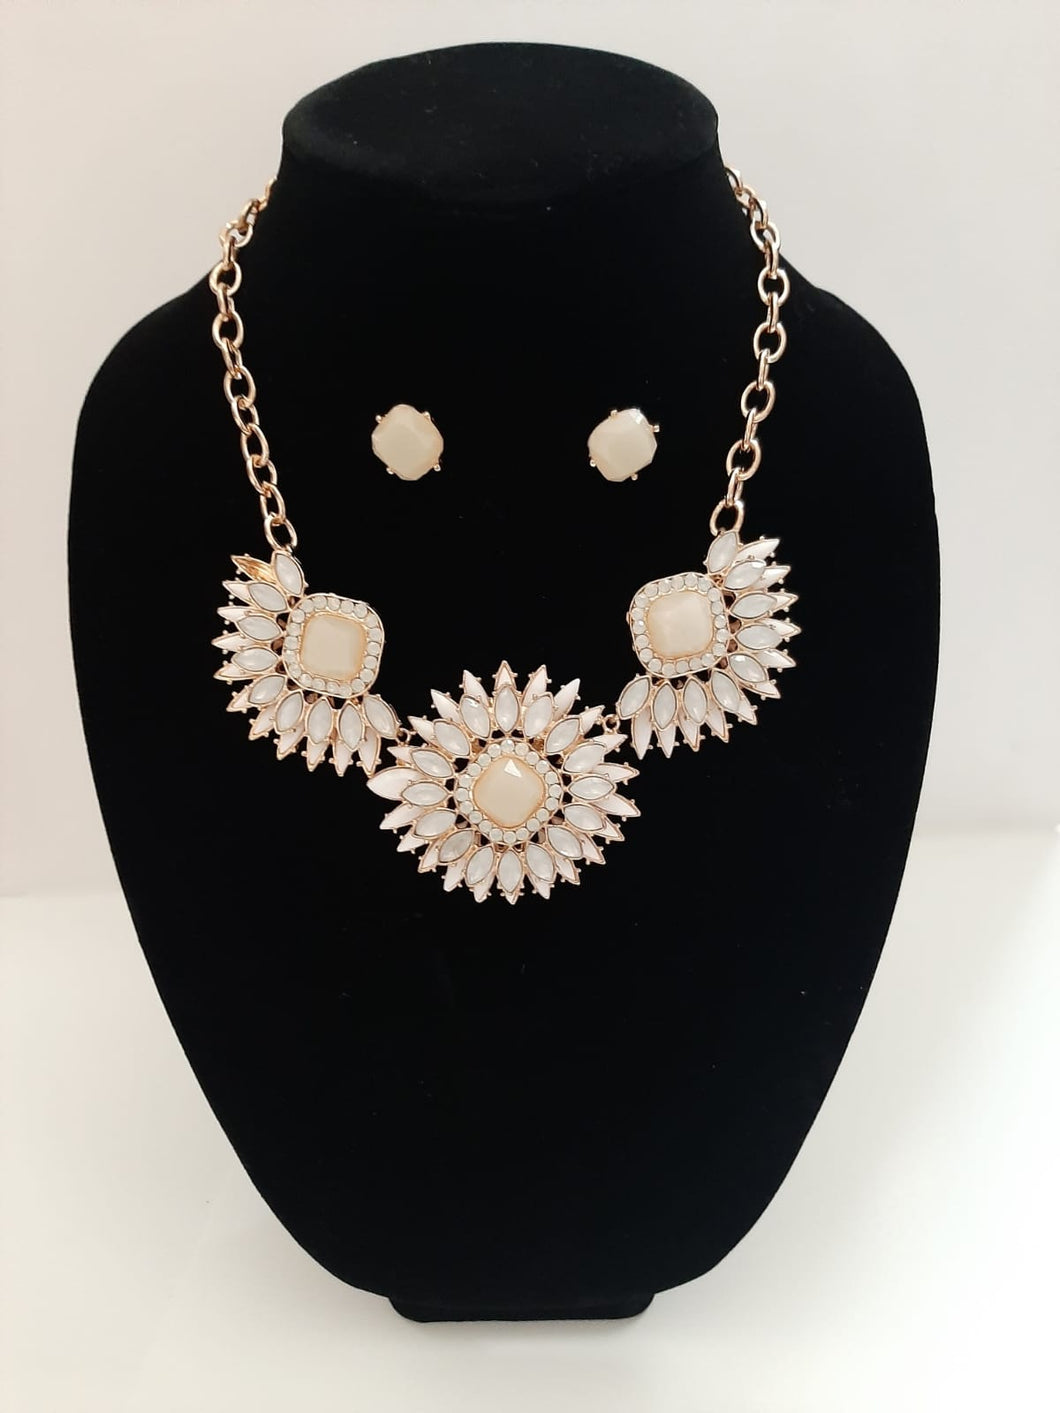 This flawless creamy necklace set is a dream, with glistening crystals on this statement necklace design. Not only will it give you the party look you desire, but also make it simple to transition from summer to fall and even winter.